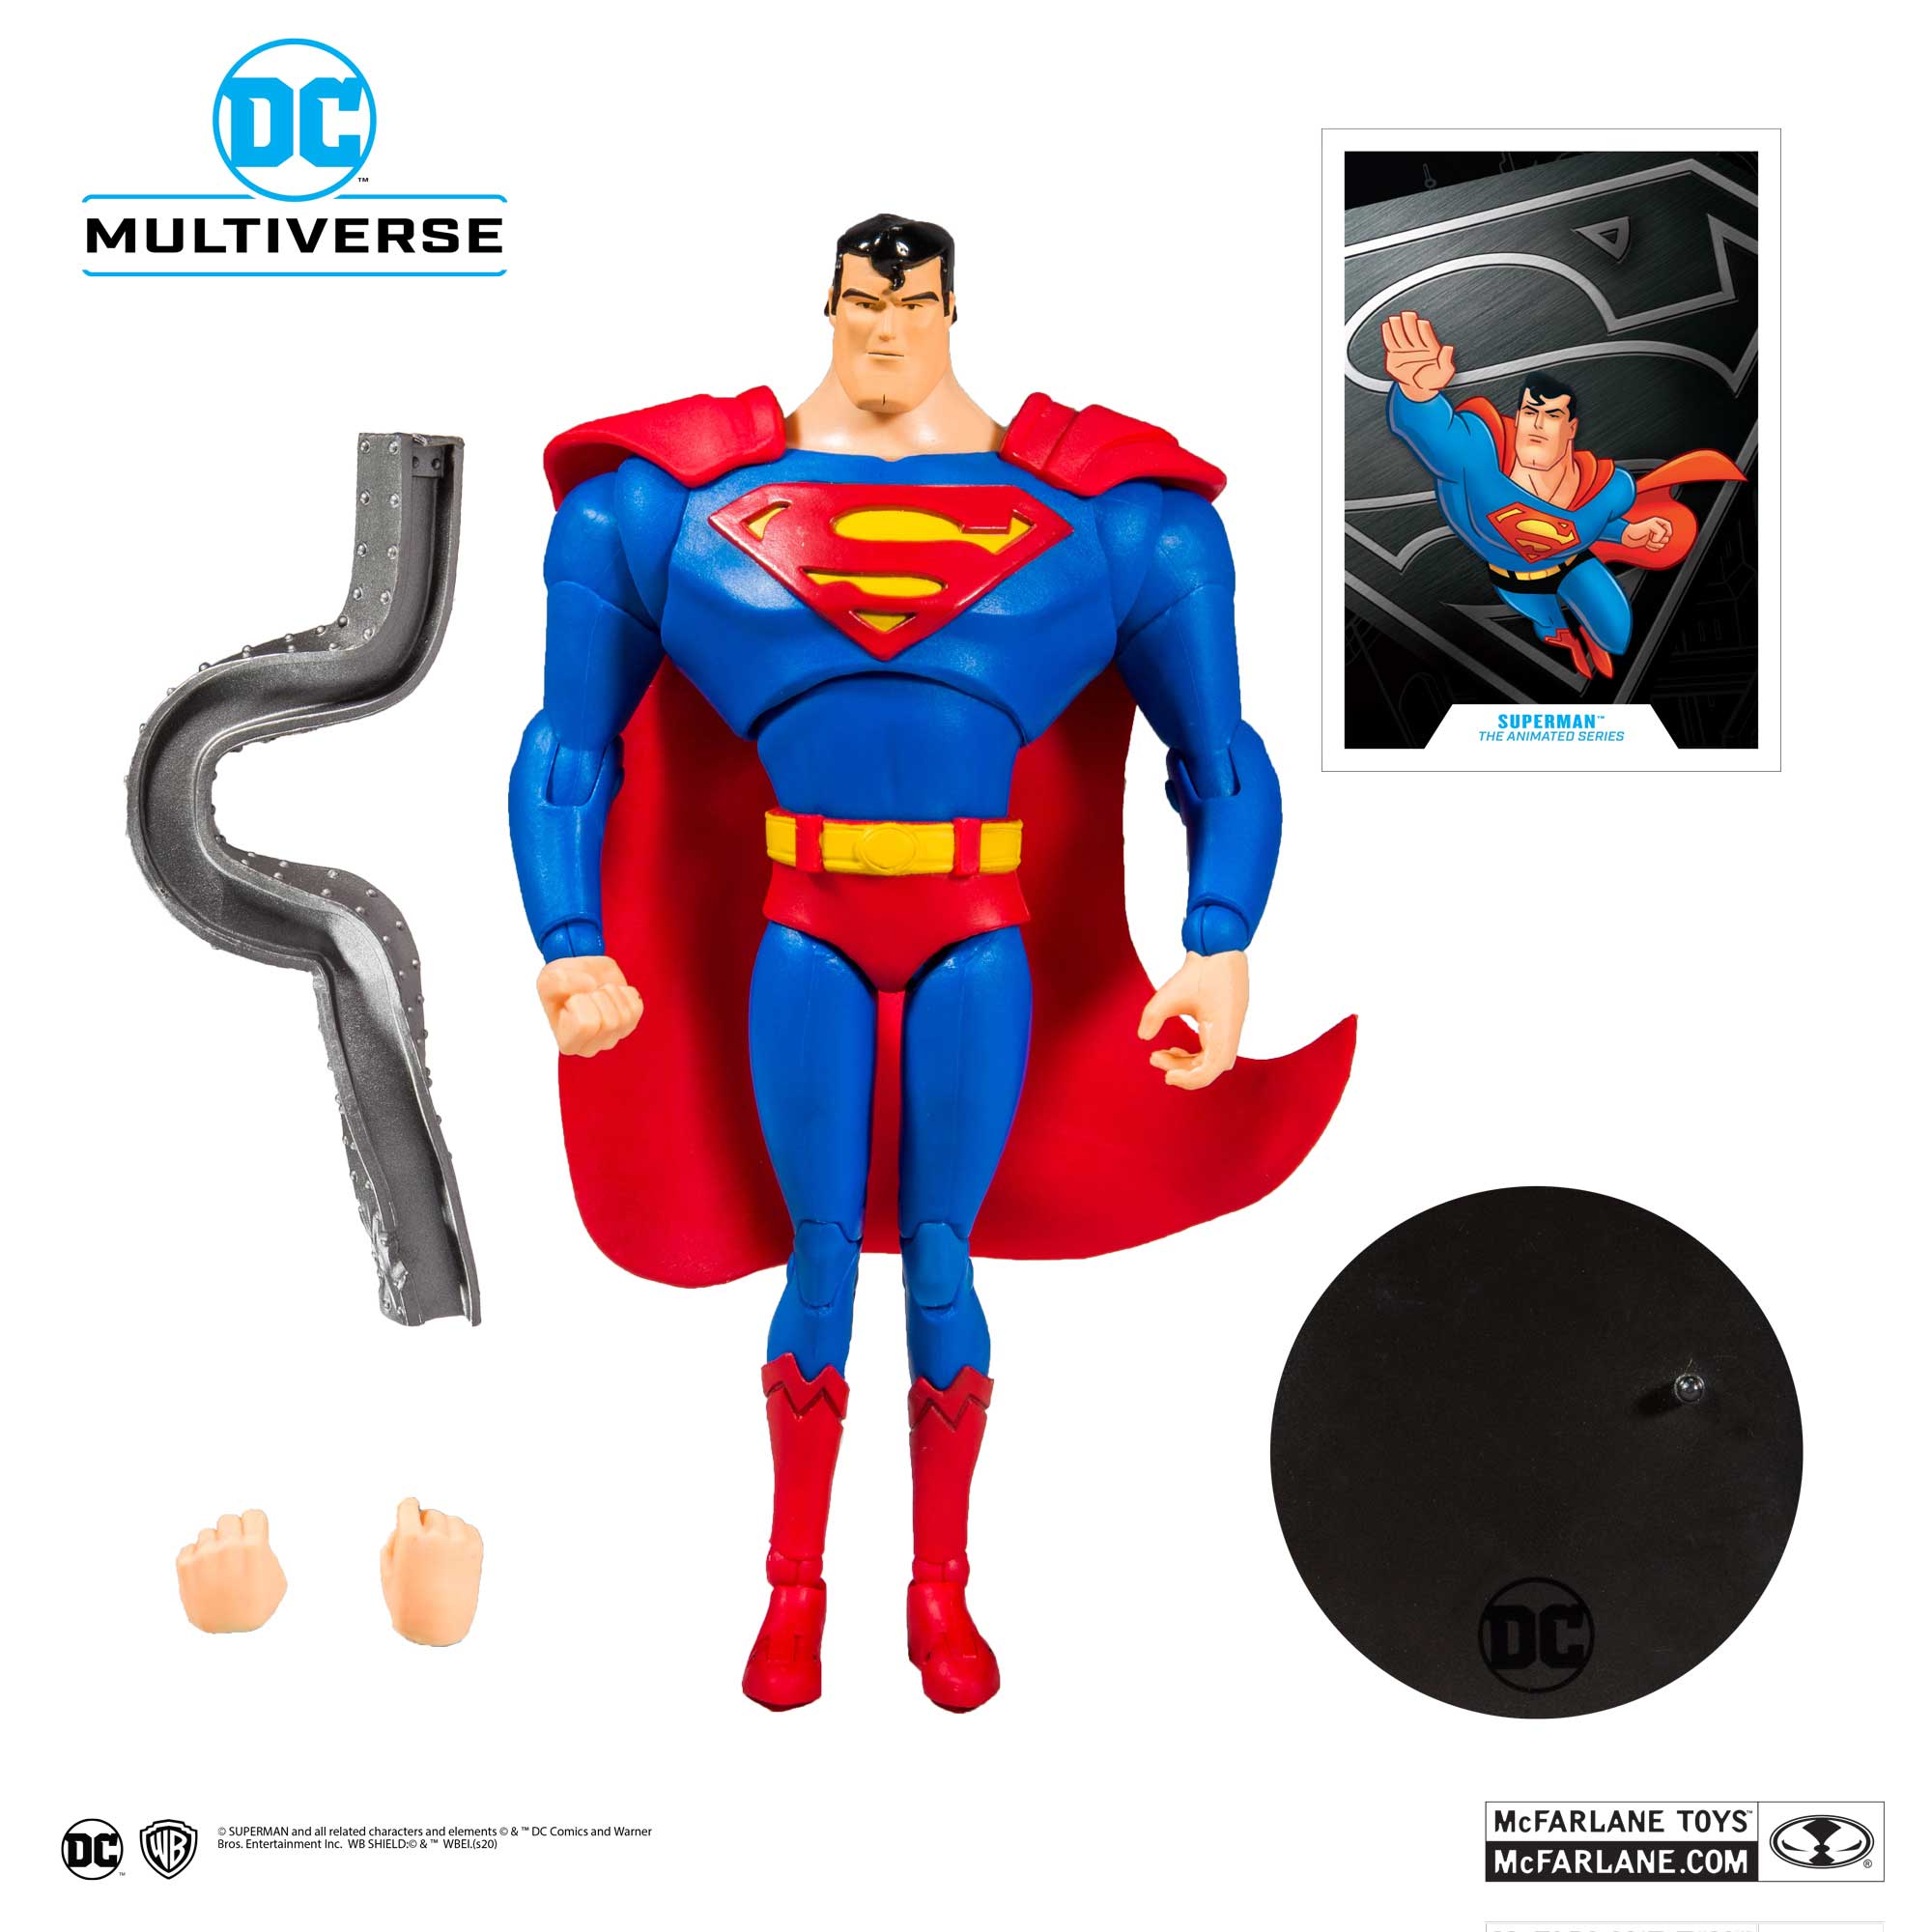 DC Multiverse Superman Animated Series Action Figure McFarlane Toys 2020 for sale online